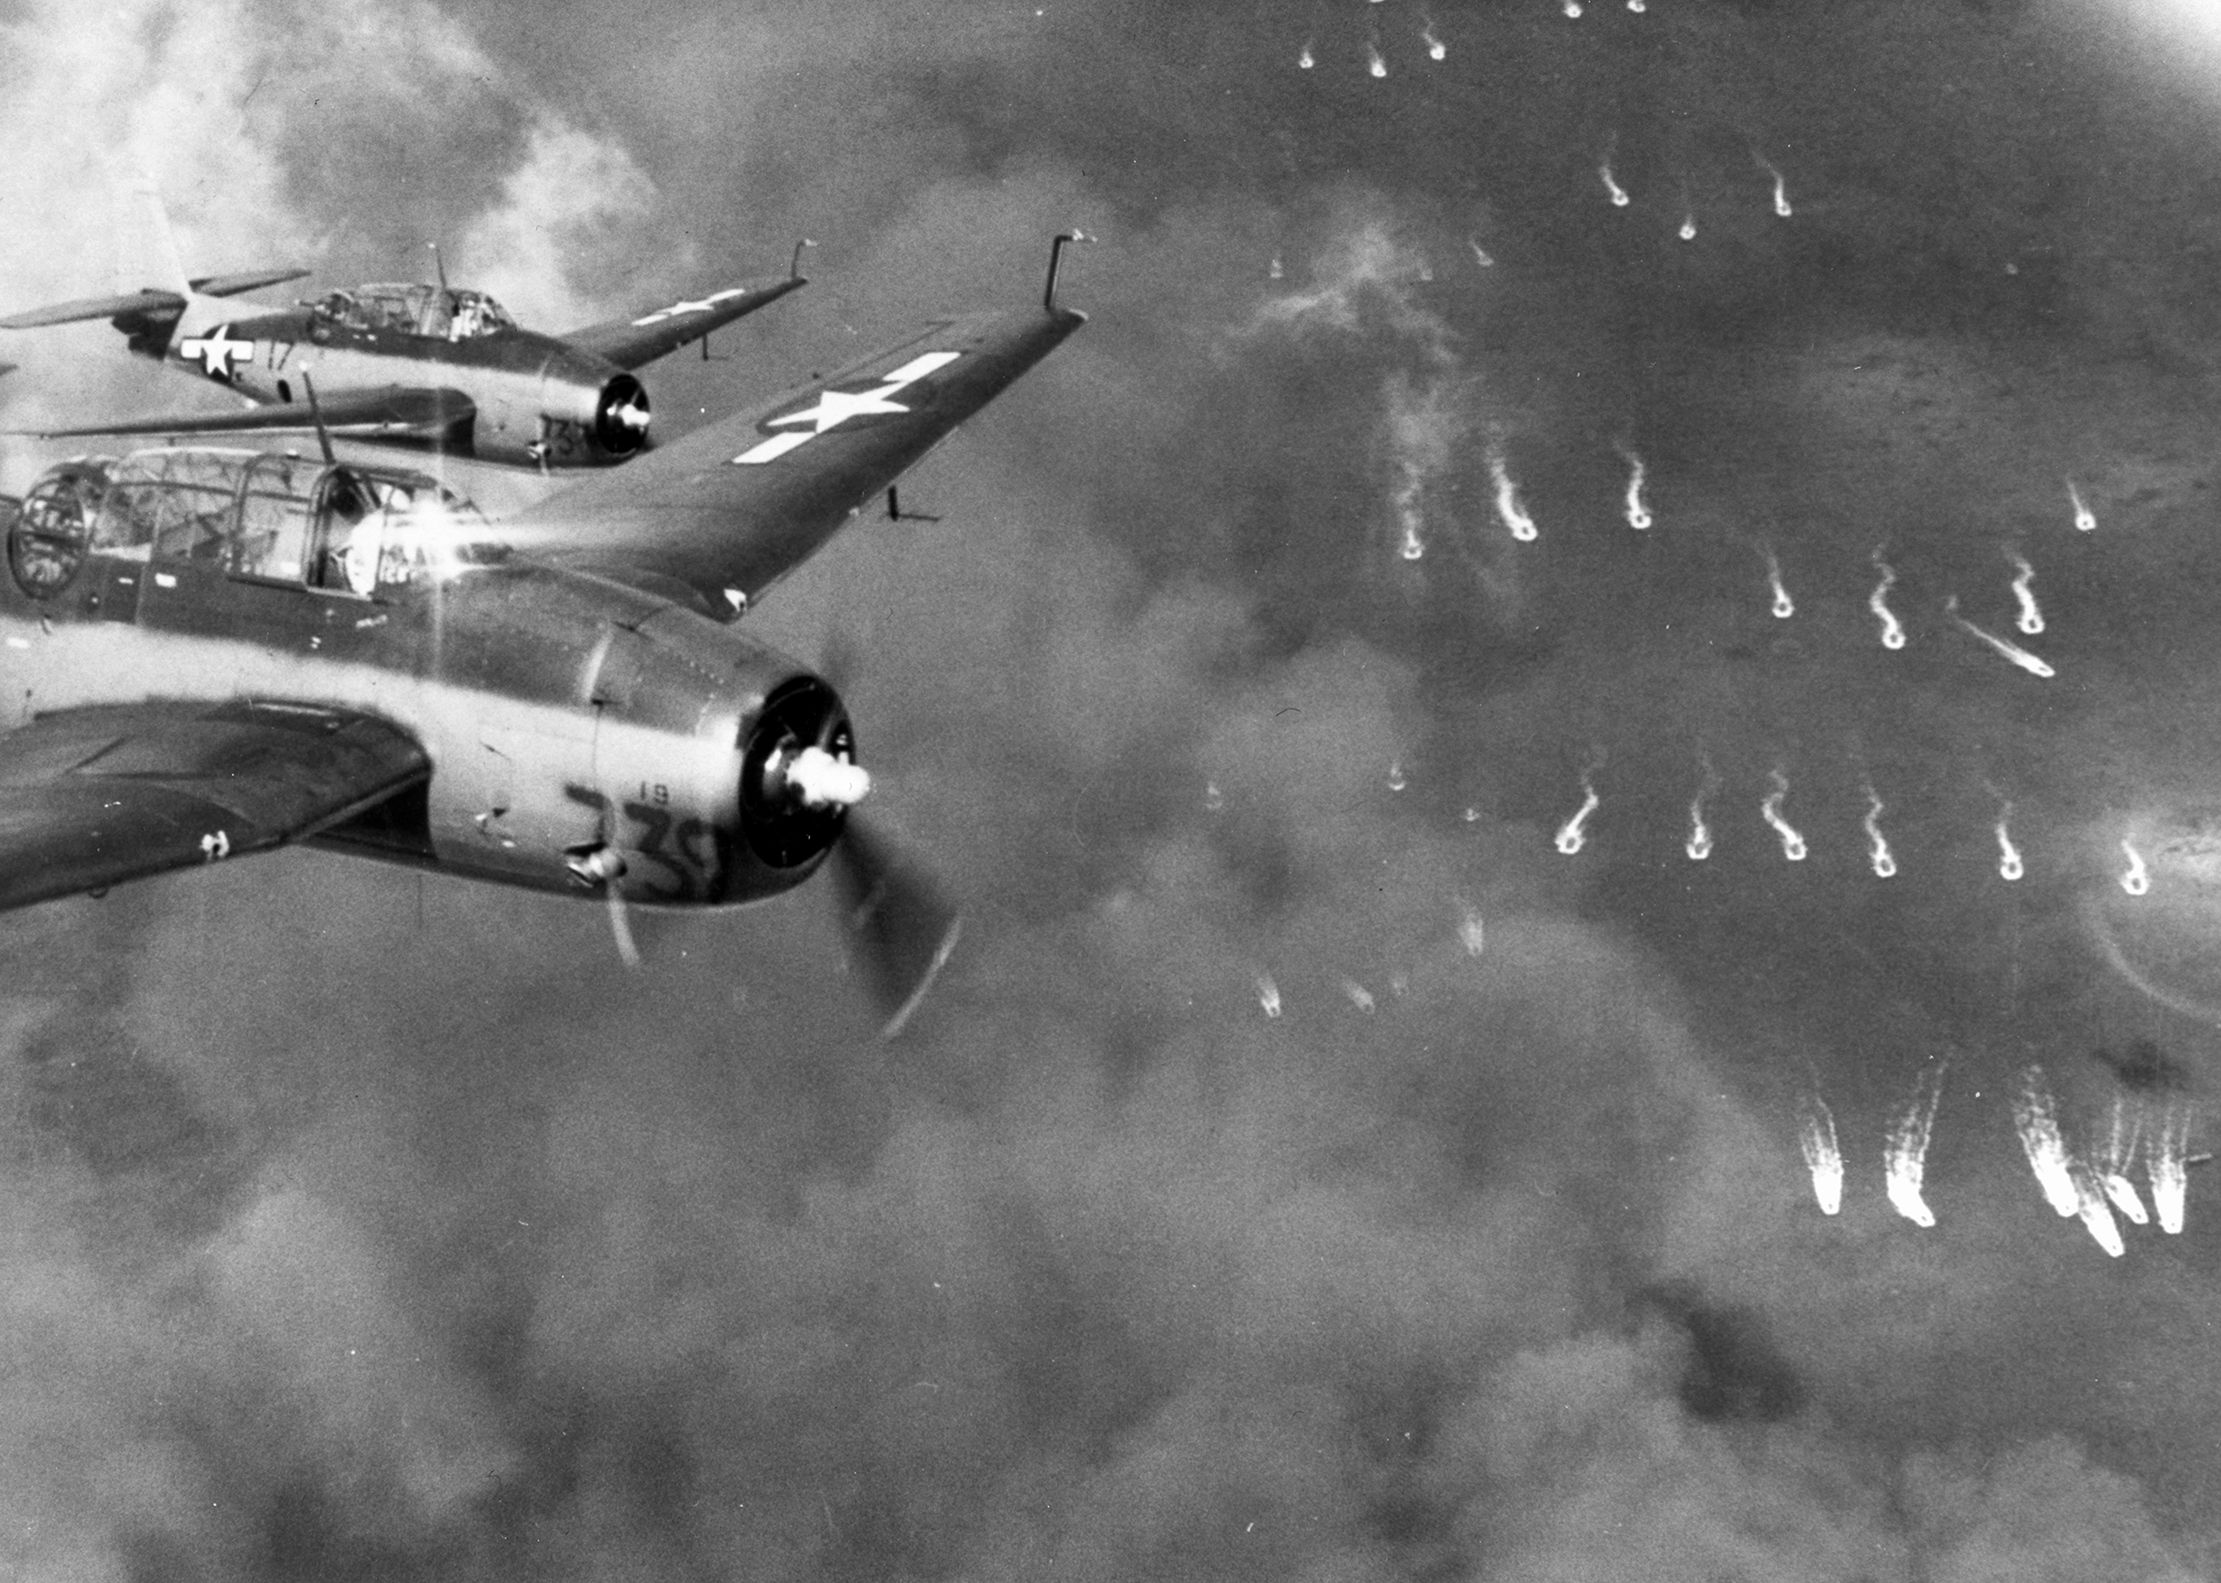 A pair of Grumman TBF Avenger bombers from the escort carrier USS Coral Sea fly near Butaritari during Operation Galvanic, November 20, 1943. The wakes of landing craft turning toward shore and the fires burning from preinvasion bombardment are visible below.